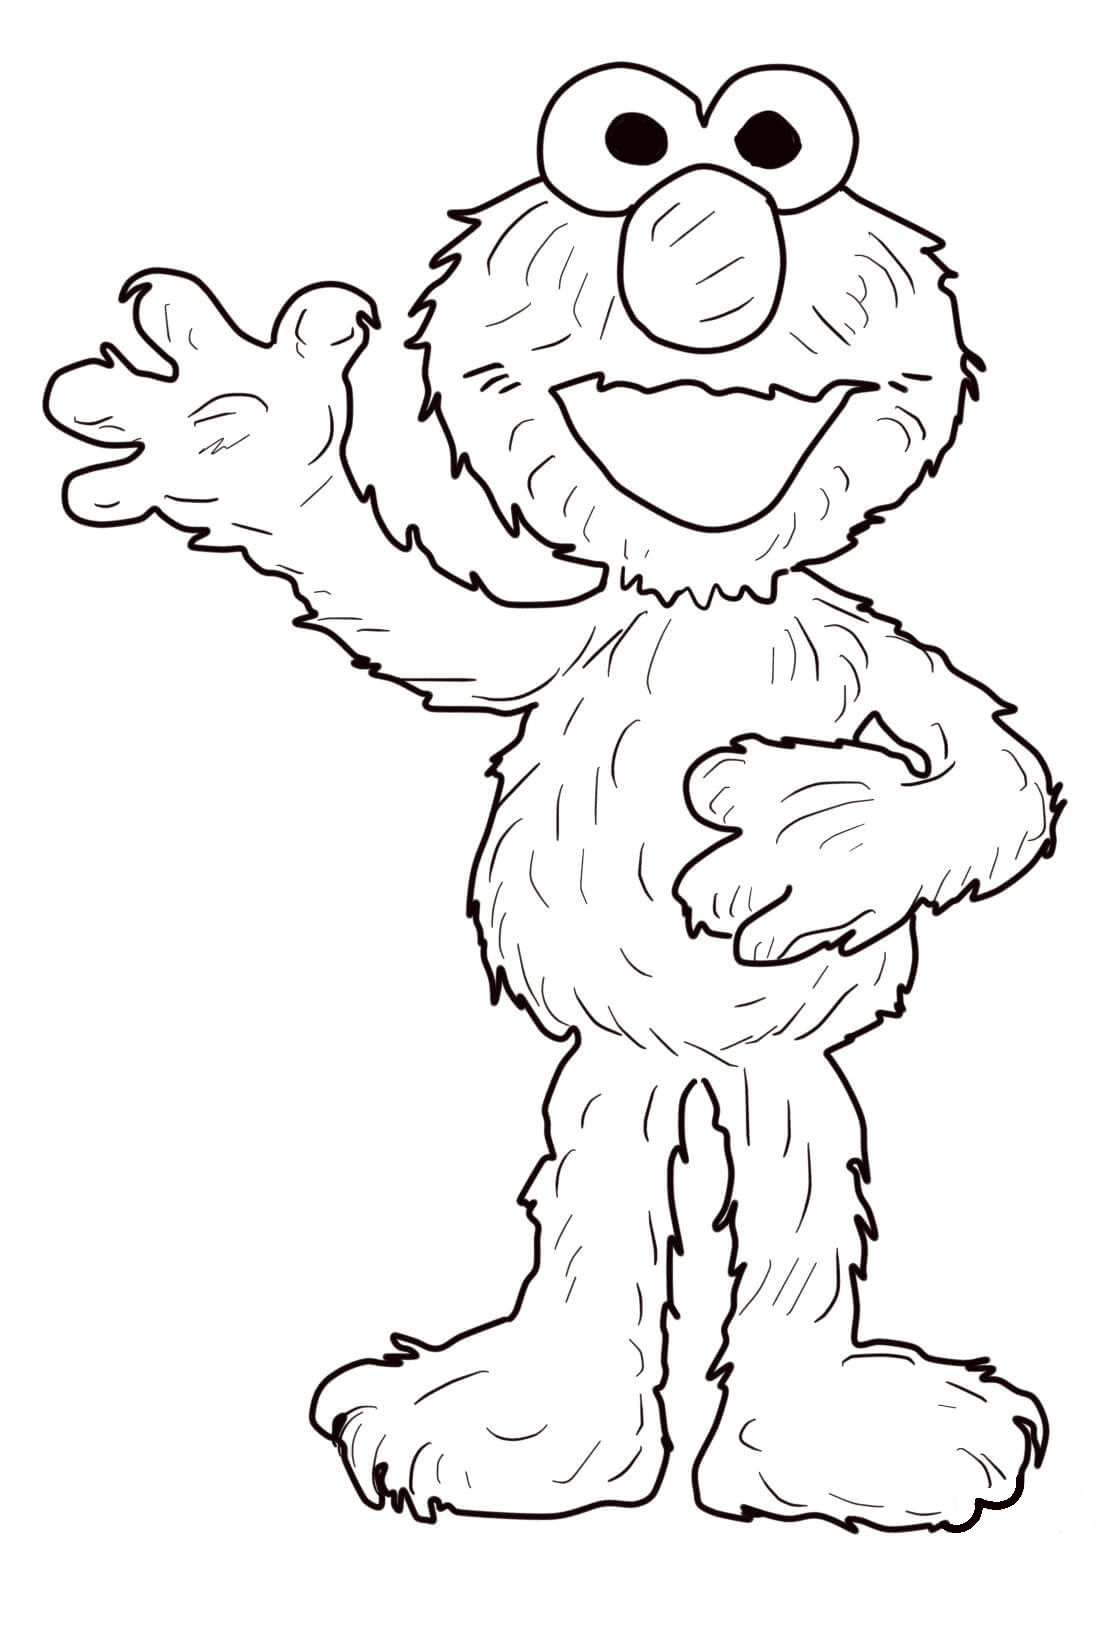 Elmo coloring pages printable for free download